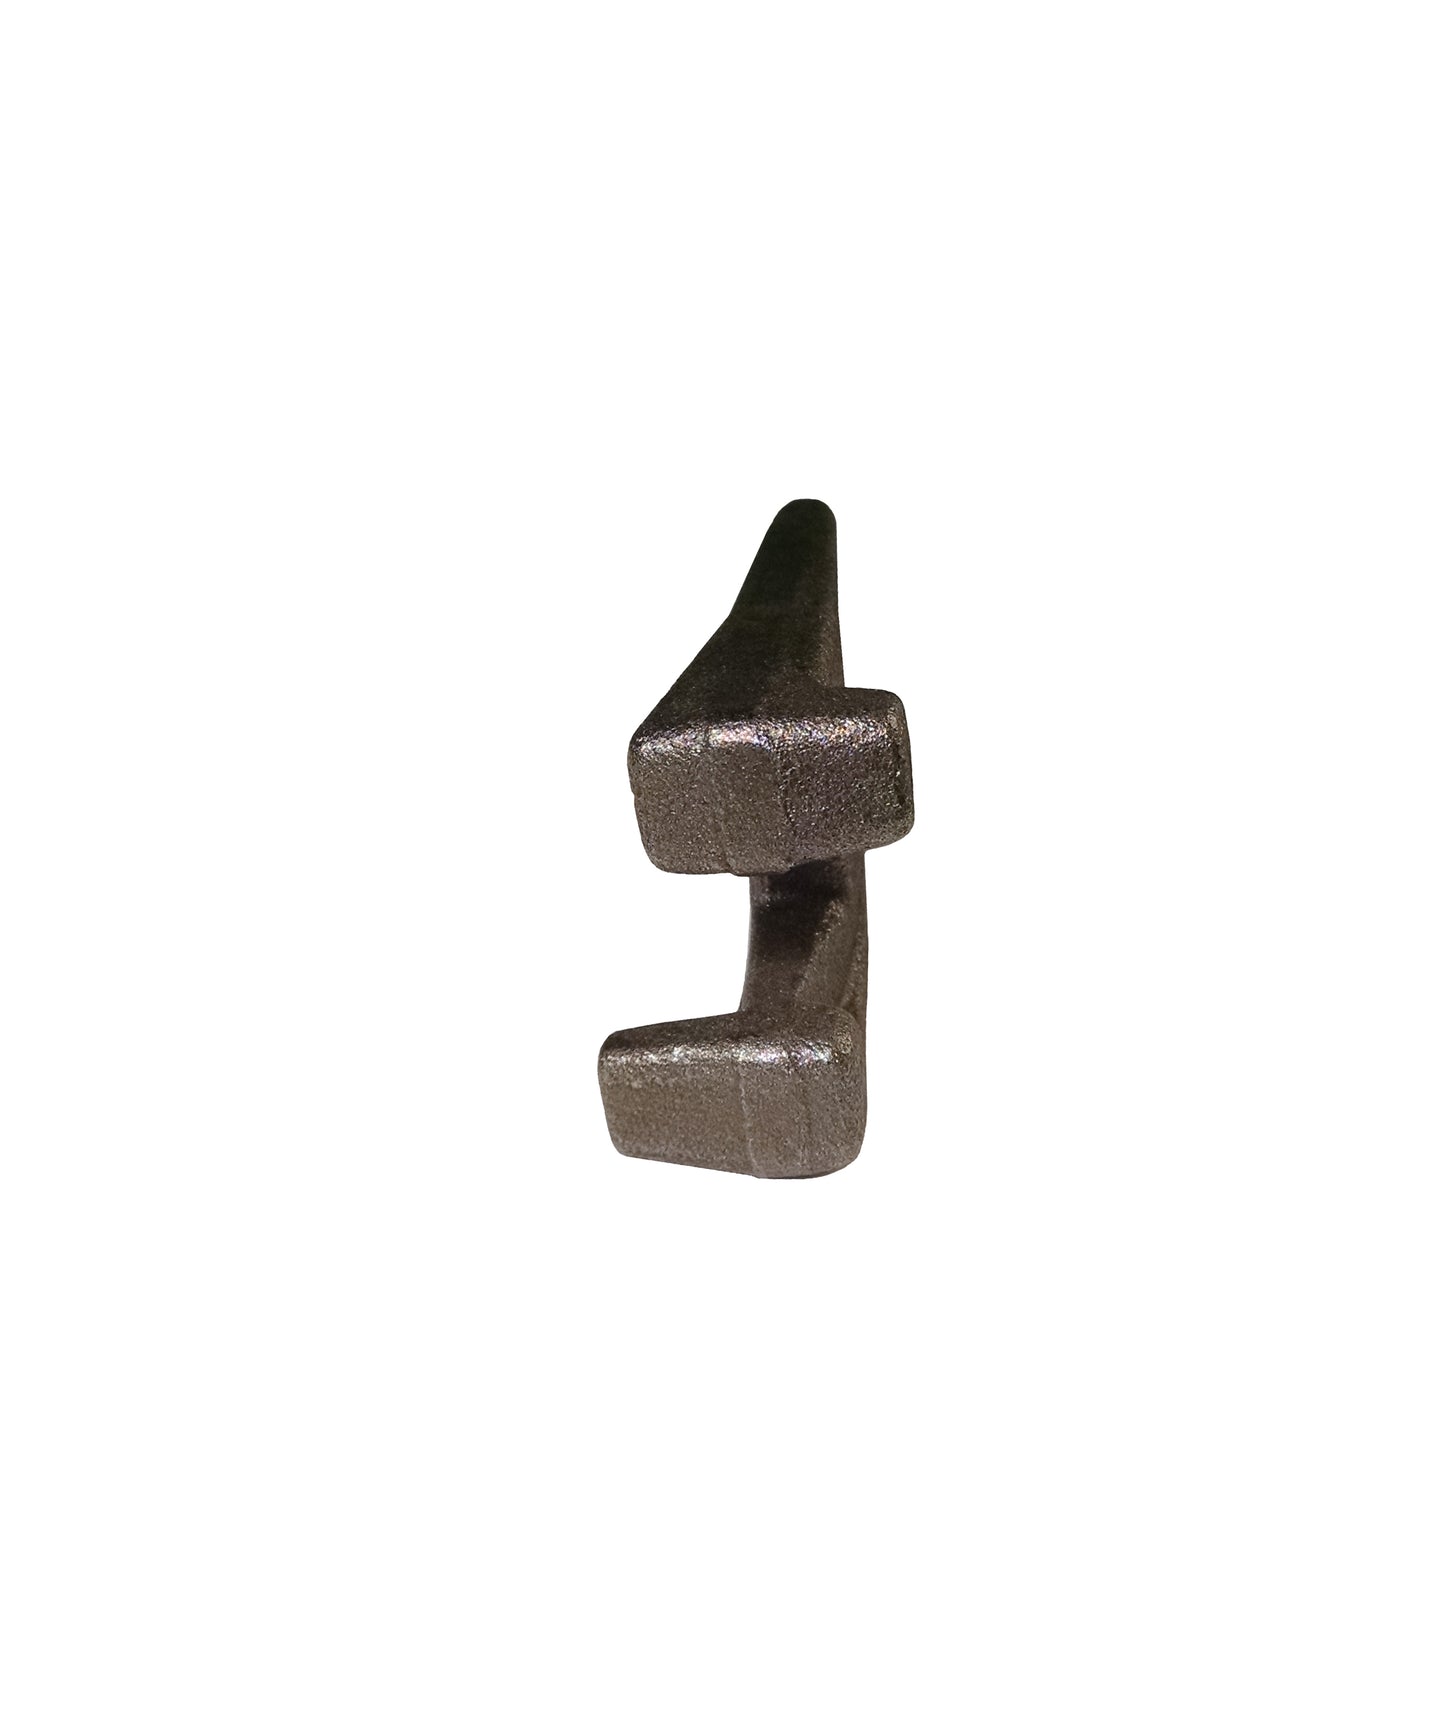 134501 Pengo Auger Tooth - 40/50 Degree Style, fits Pengo Aggressor Augers